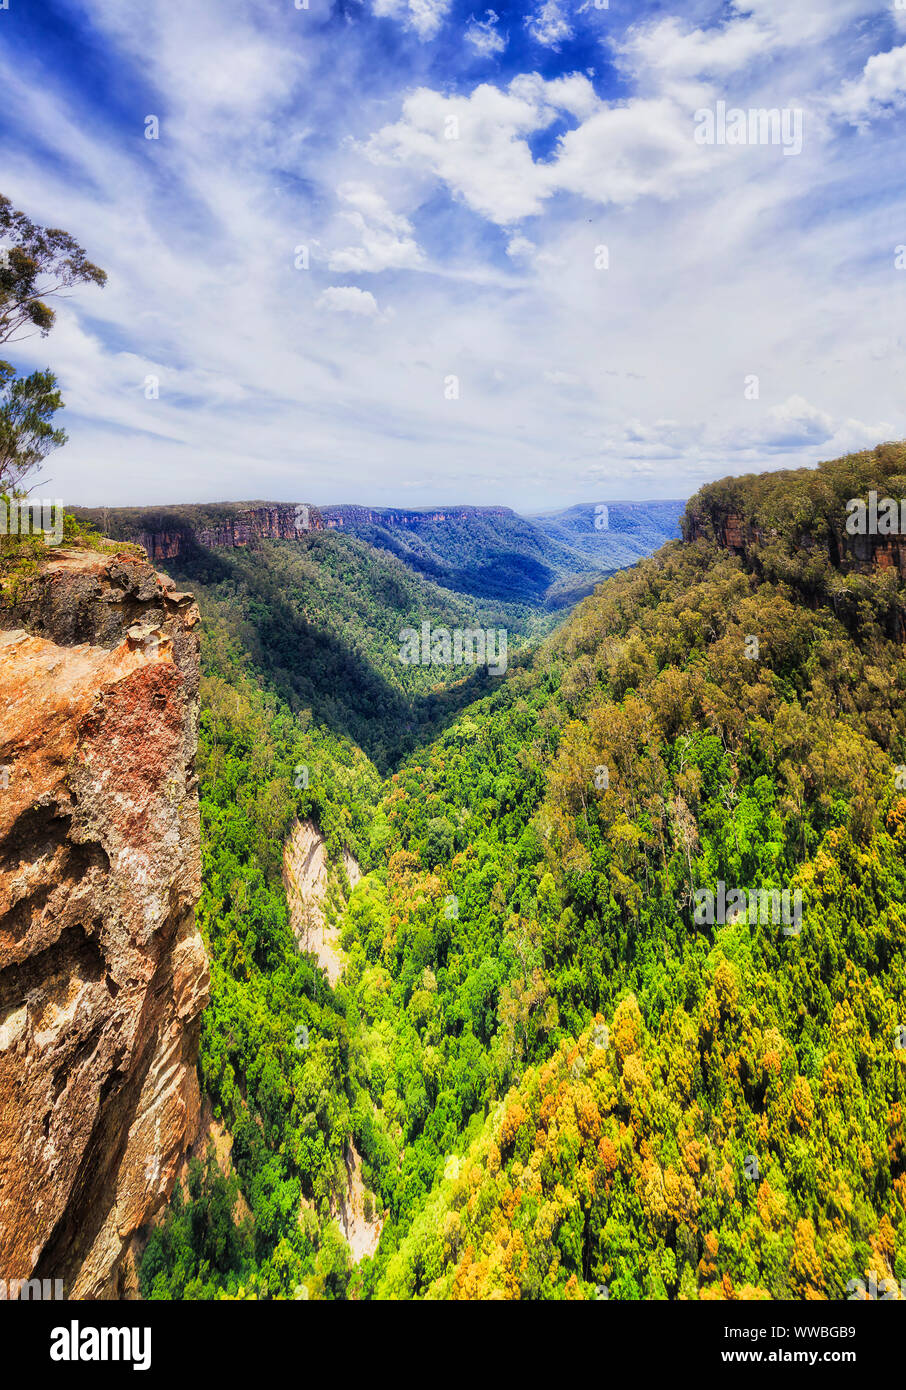 Deep Yarrunga Valley between sandstone mountain ranges on Australian Great Dividing range on a sunny day under blue sky with lush gum-tree woods. Stock Photo